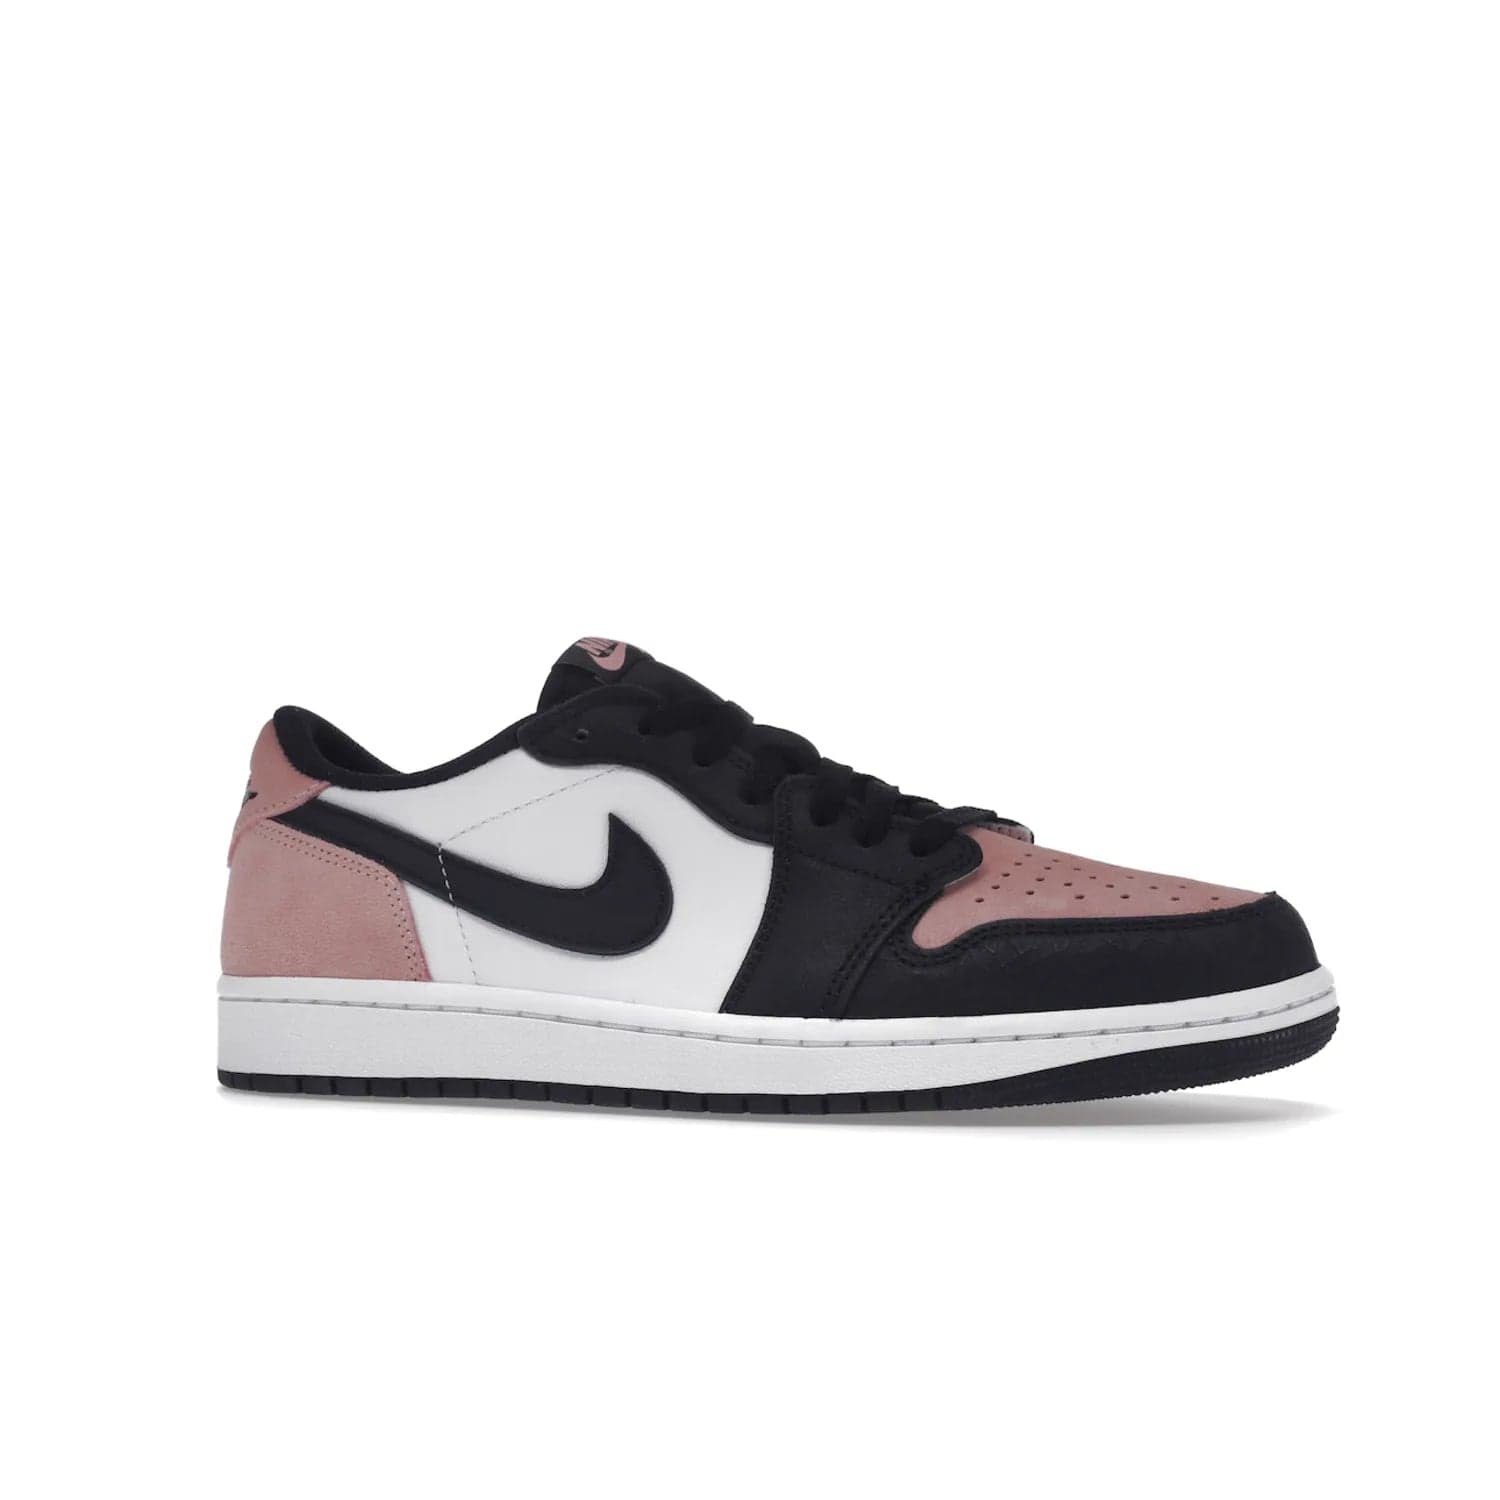 Jordan 1 Low OG Bleached Coral - Image 3 - Only at www.BallersClubKickz.com - Introducing the Air Jordan 1 Low OG Bleached Coral. Constructed with white leather, black cracked leather & Bleached Coral suede. Signature Jordan Wings logo, white Air sole. Get the pack in July 2022 and stand out.